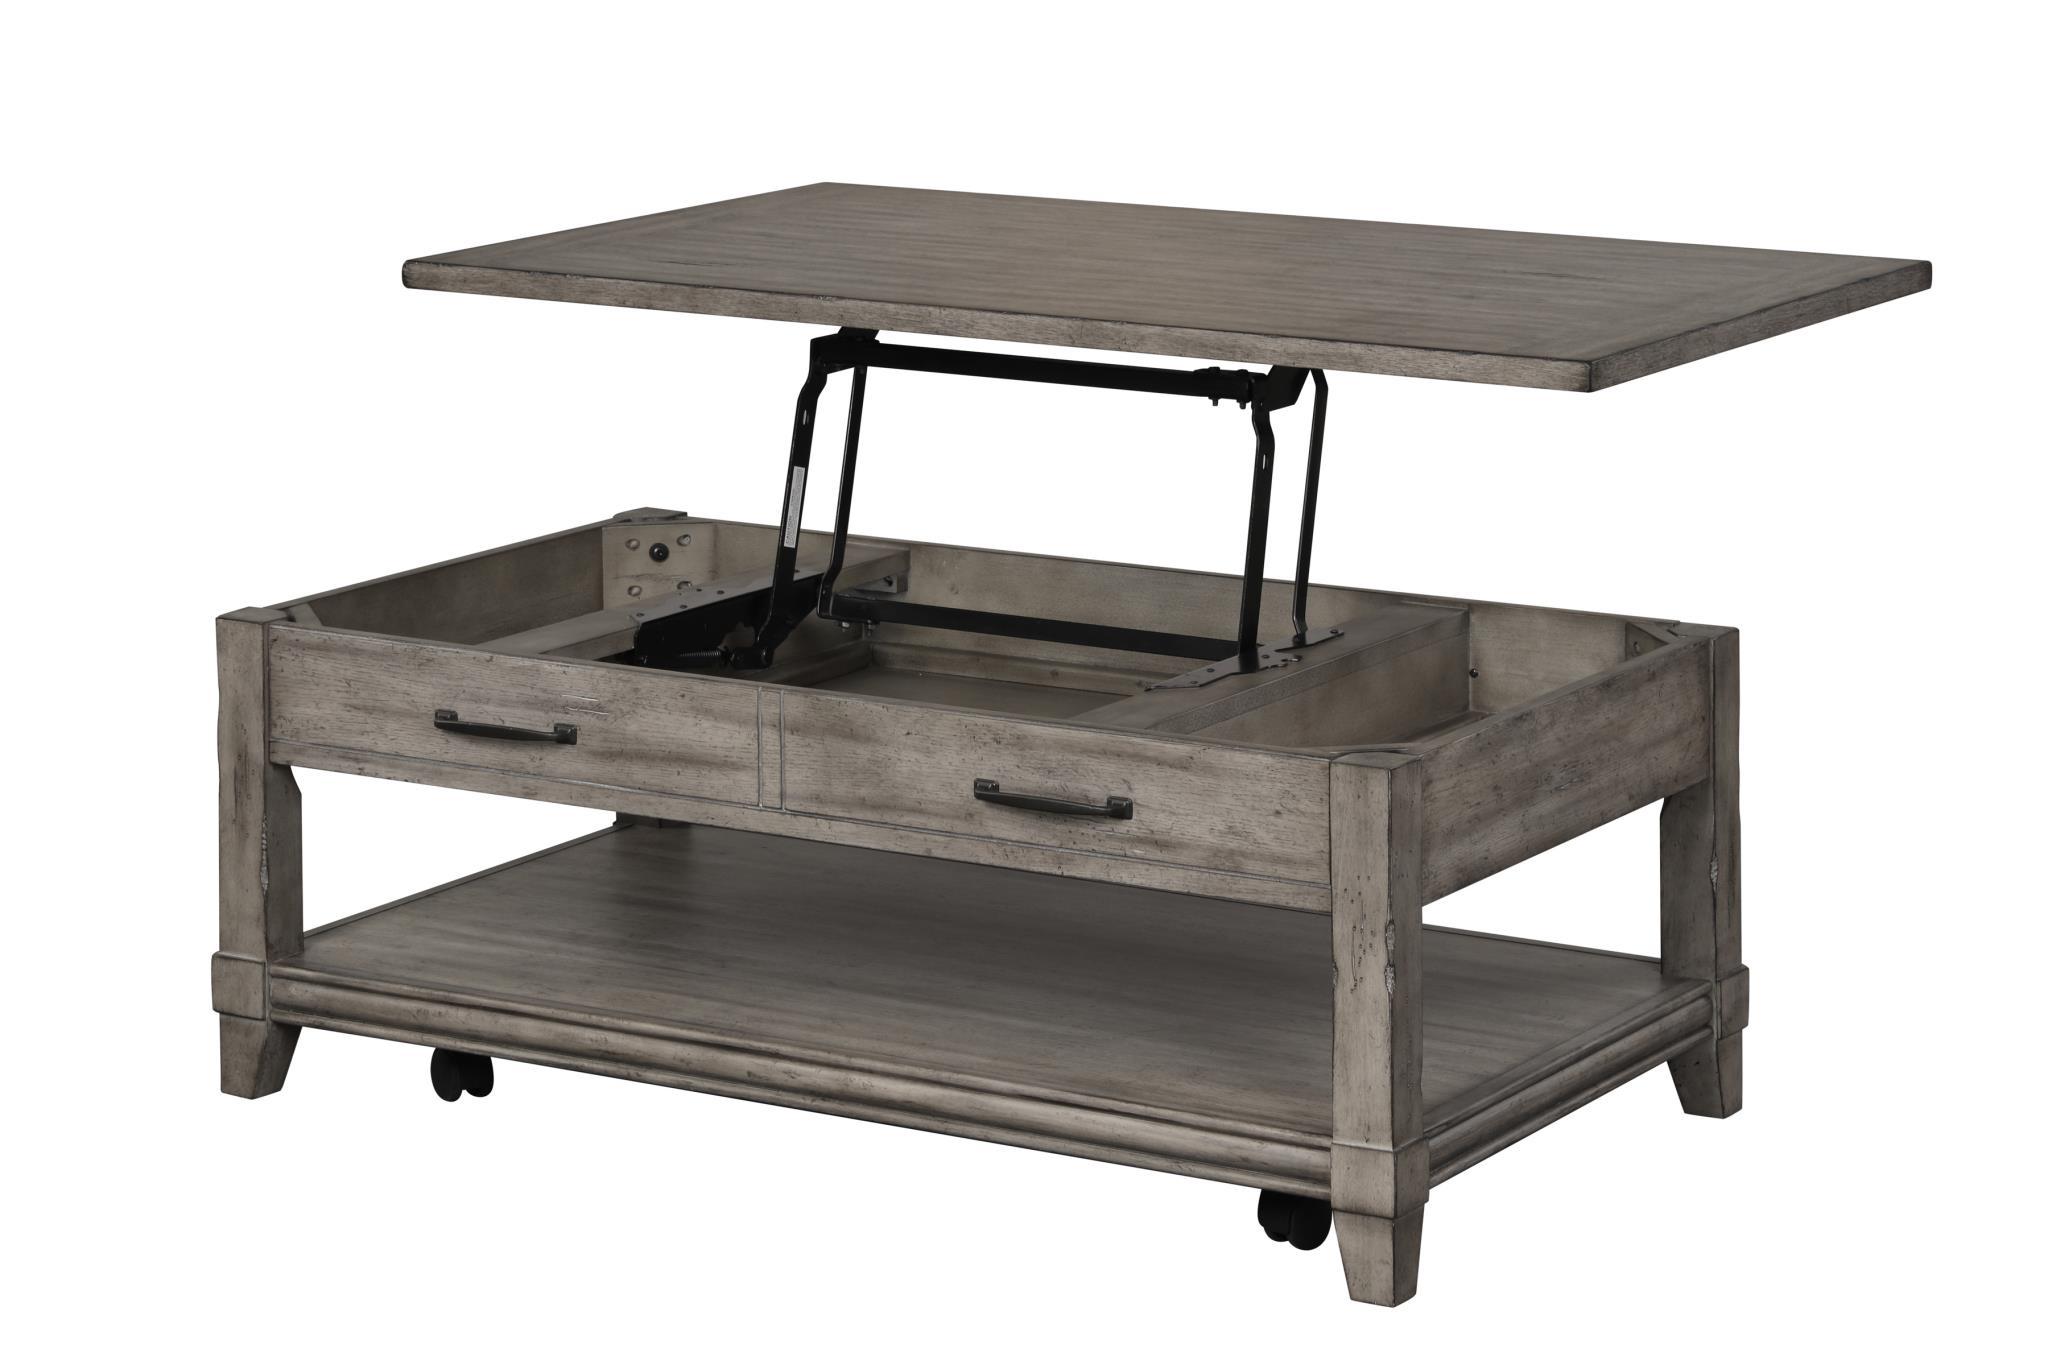 Modern, Transitional Coffee Table Rustic 1284-001 in Gray 